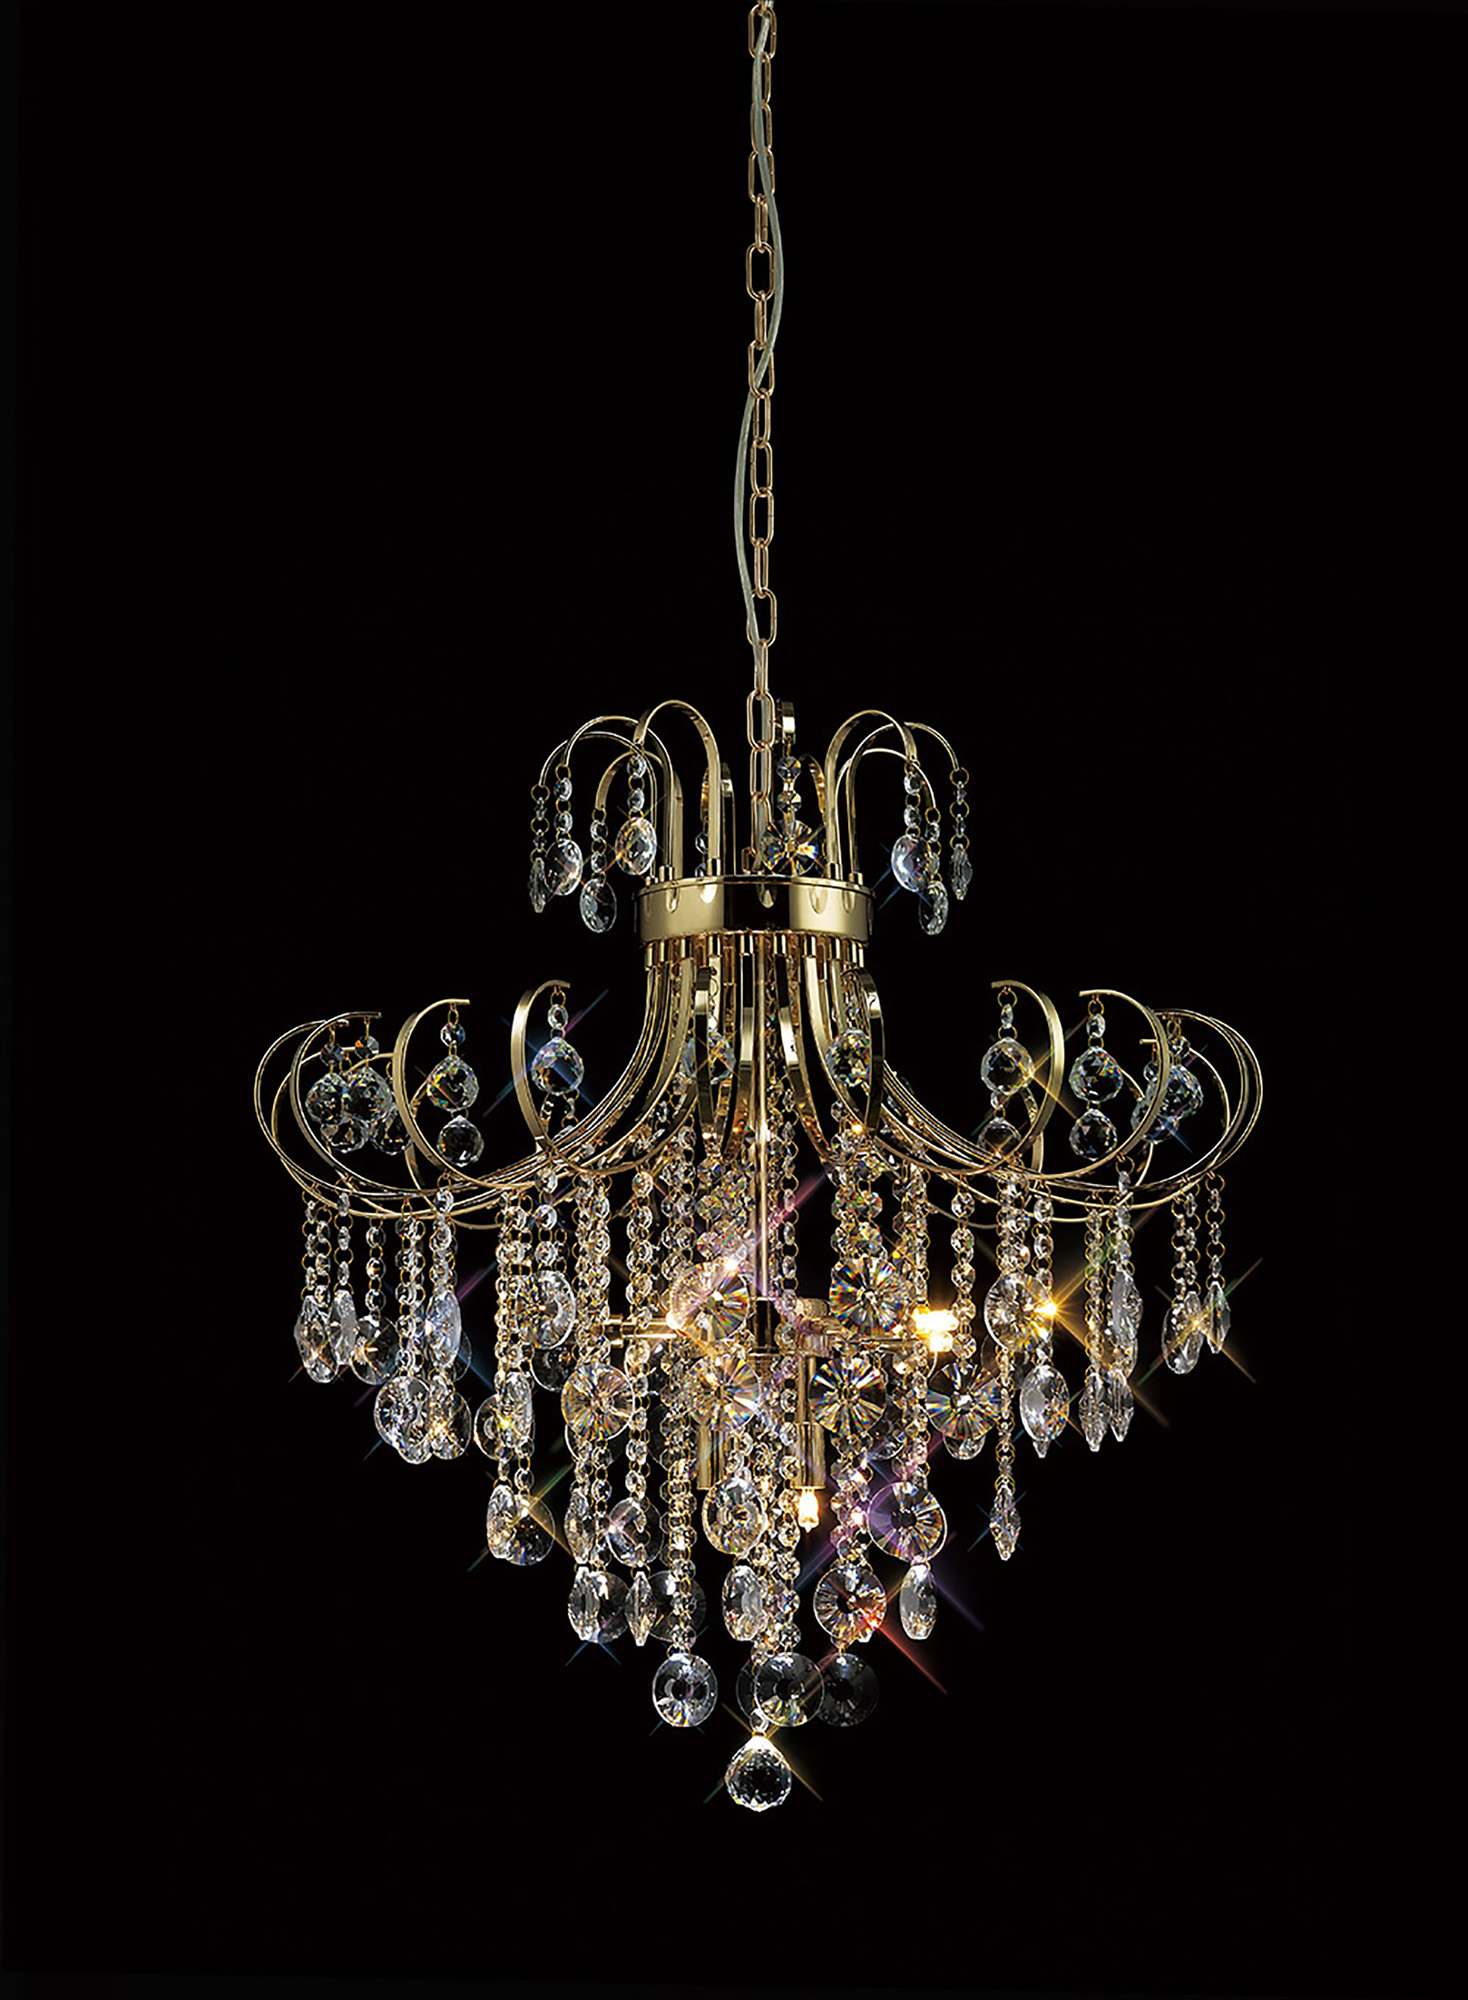 Rosina French Gold Crystal Ceiling Lights Diyas Contemporary Chandeliers